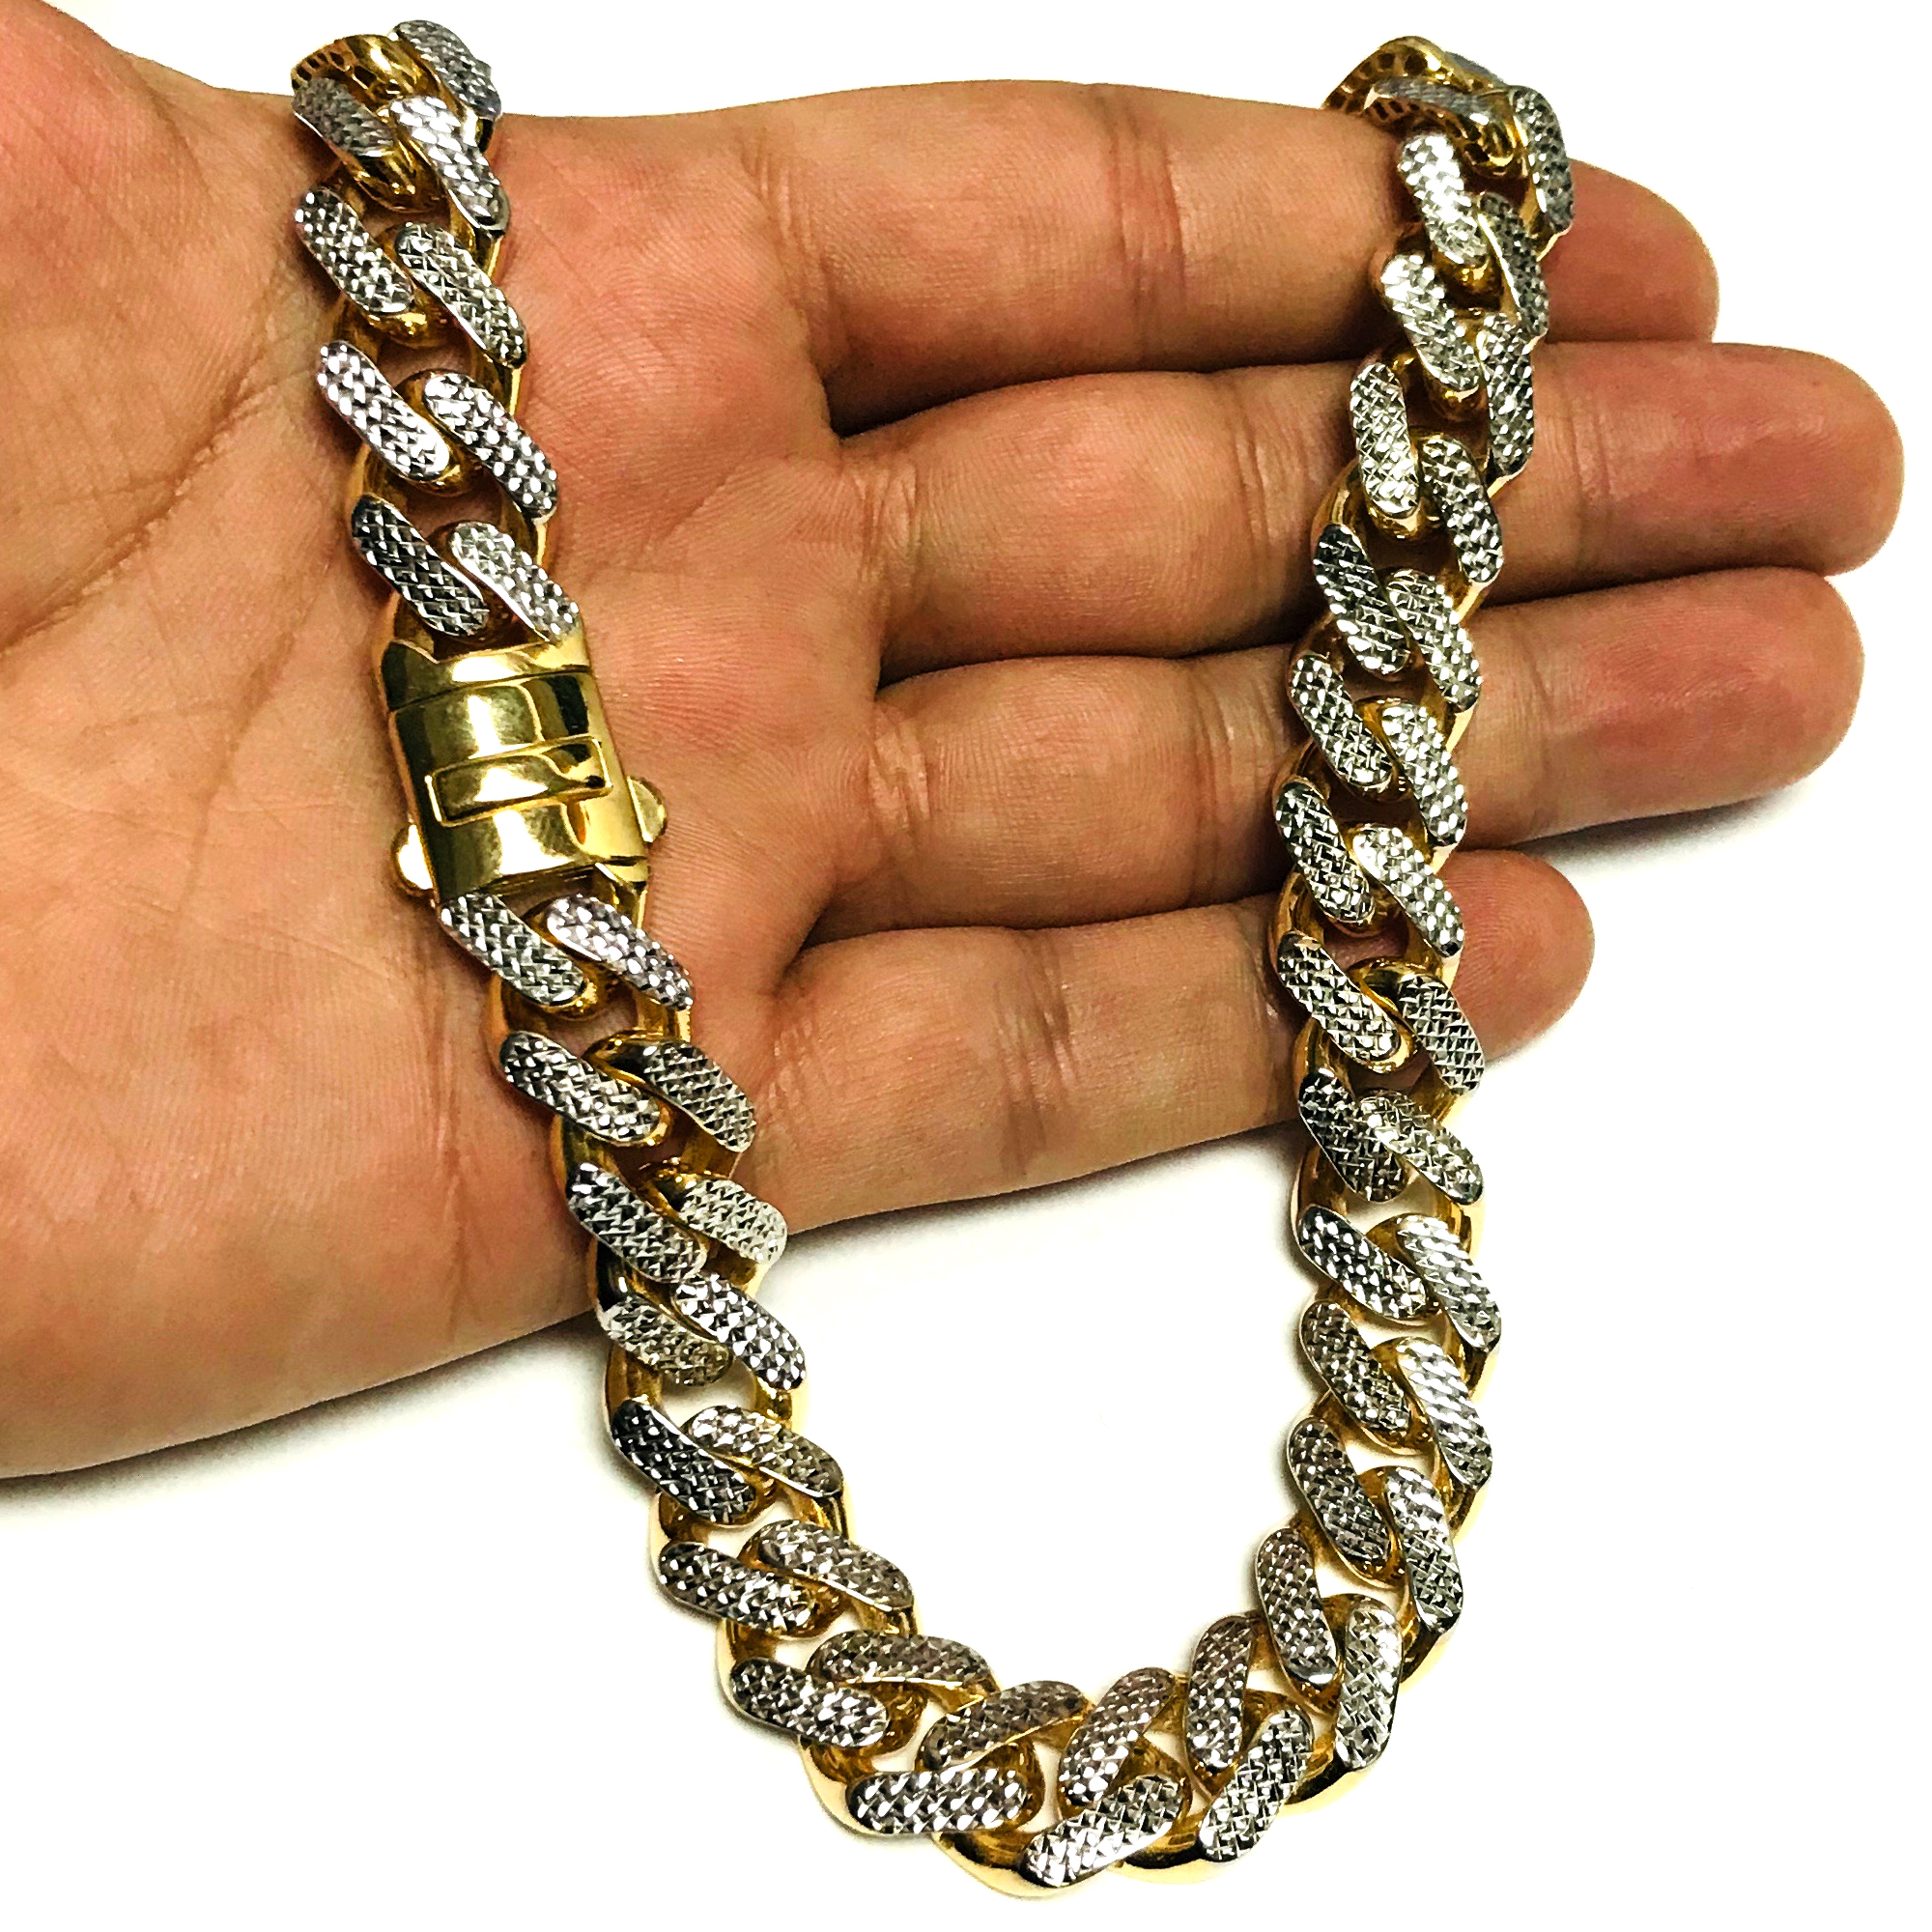 Jewelry Affairs 14k Yellow And White Gold Miami Cuban Pave Link Chain Semi Solid Necklace, Width 13.5mm, 24"